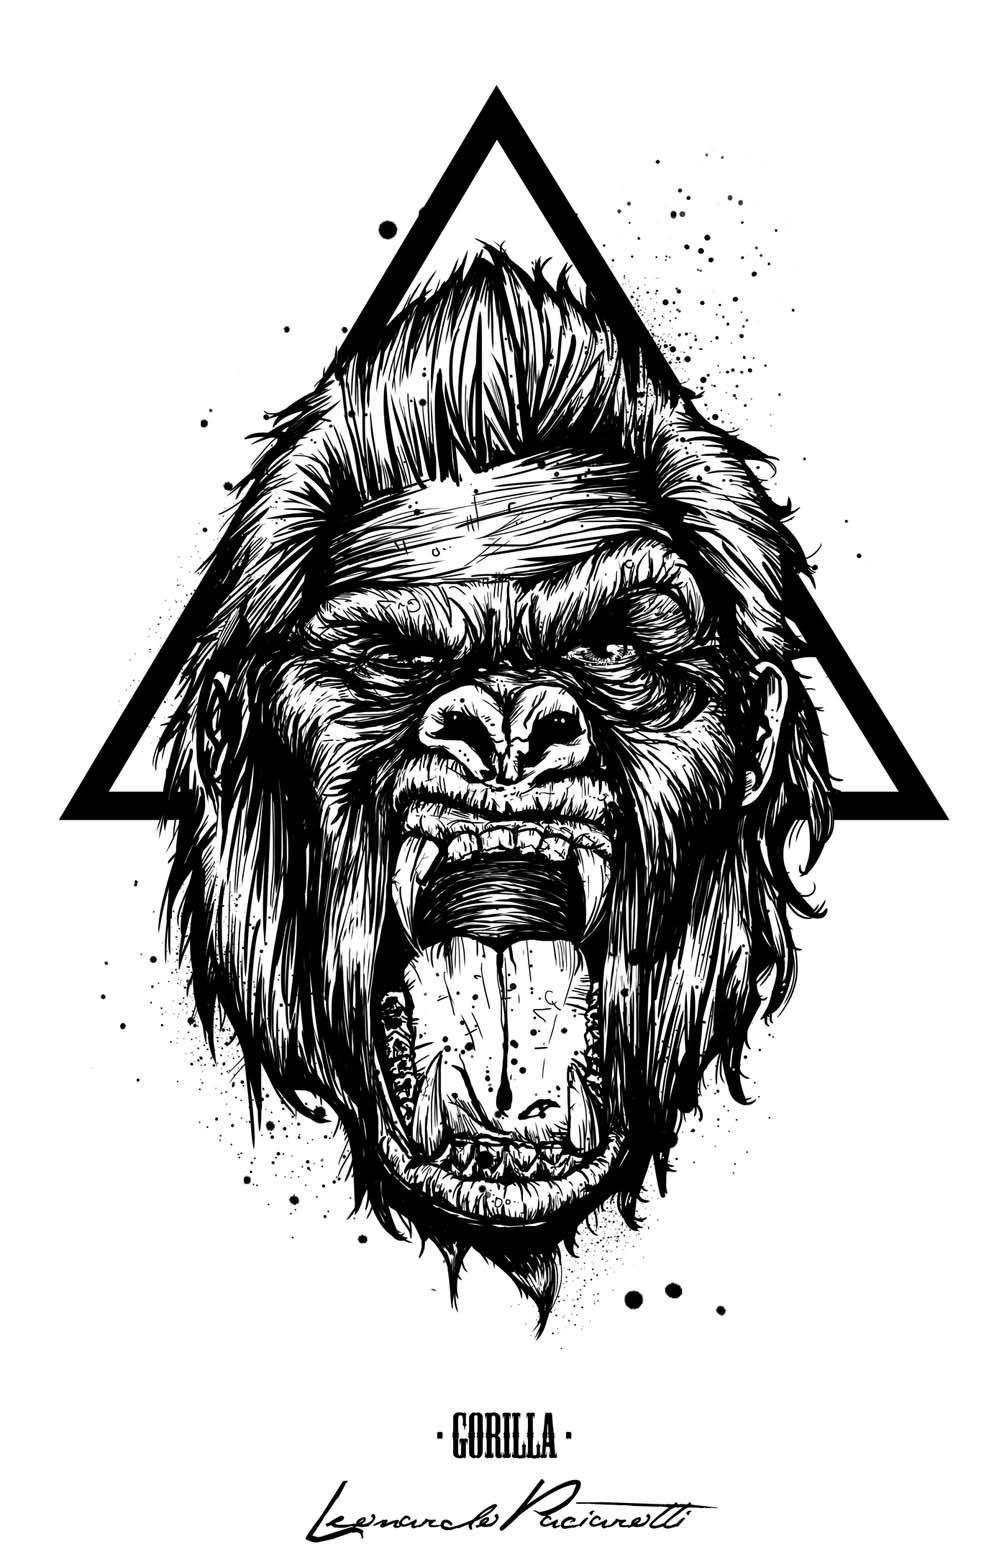 190+ Magnificent Gorilla Tattoo Designs With Meanings (2022